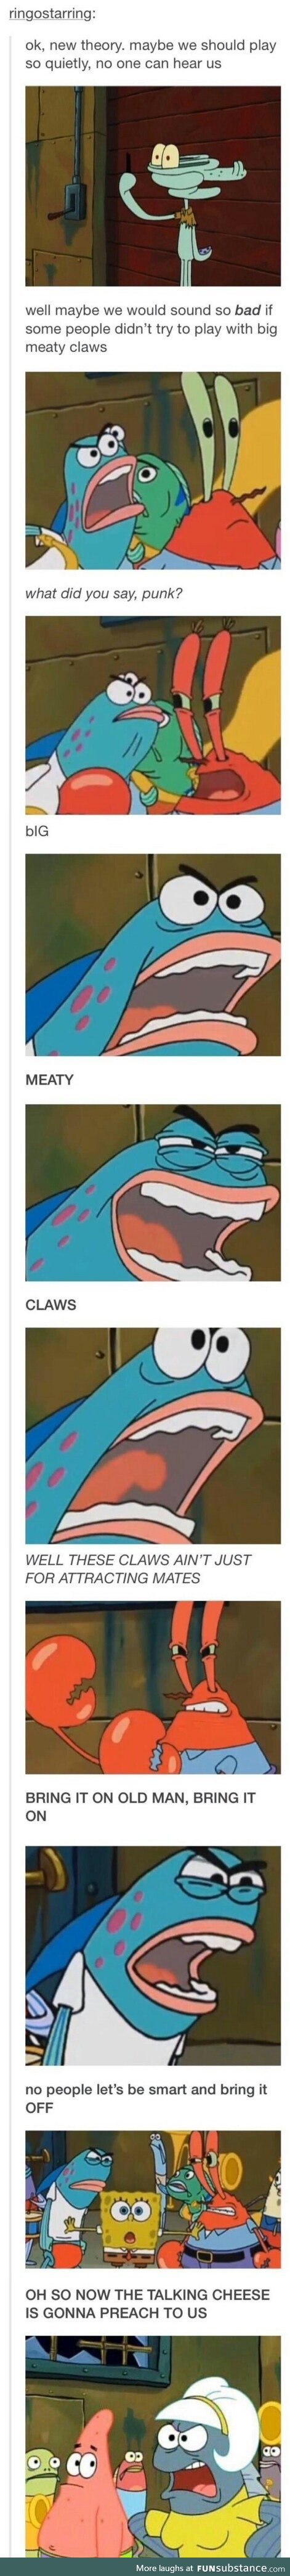 angel laurio recommends big meaty claws gif pic